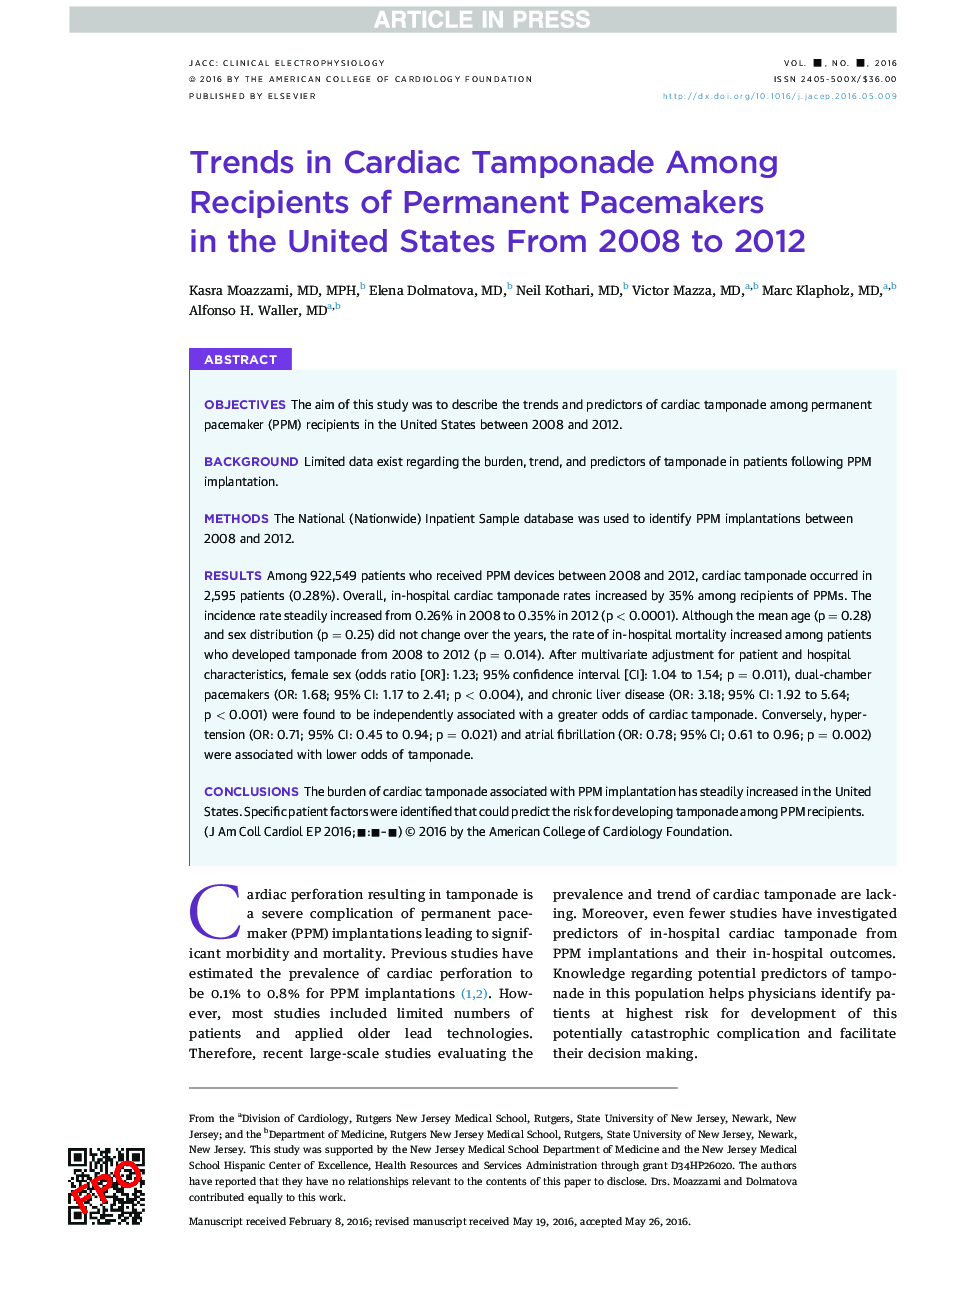 Trends in Cardiac Tamponade Among Recipients of Permanent Pacemakers inÂ the United States: From 2008 to 2012